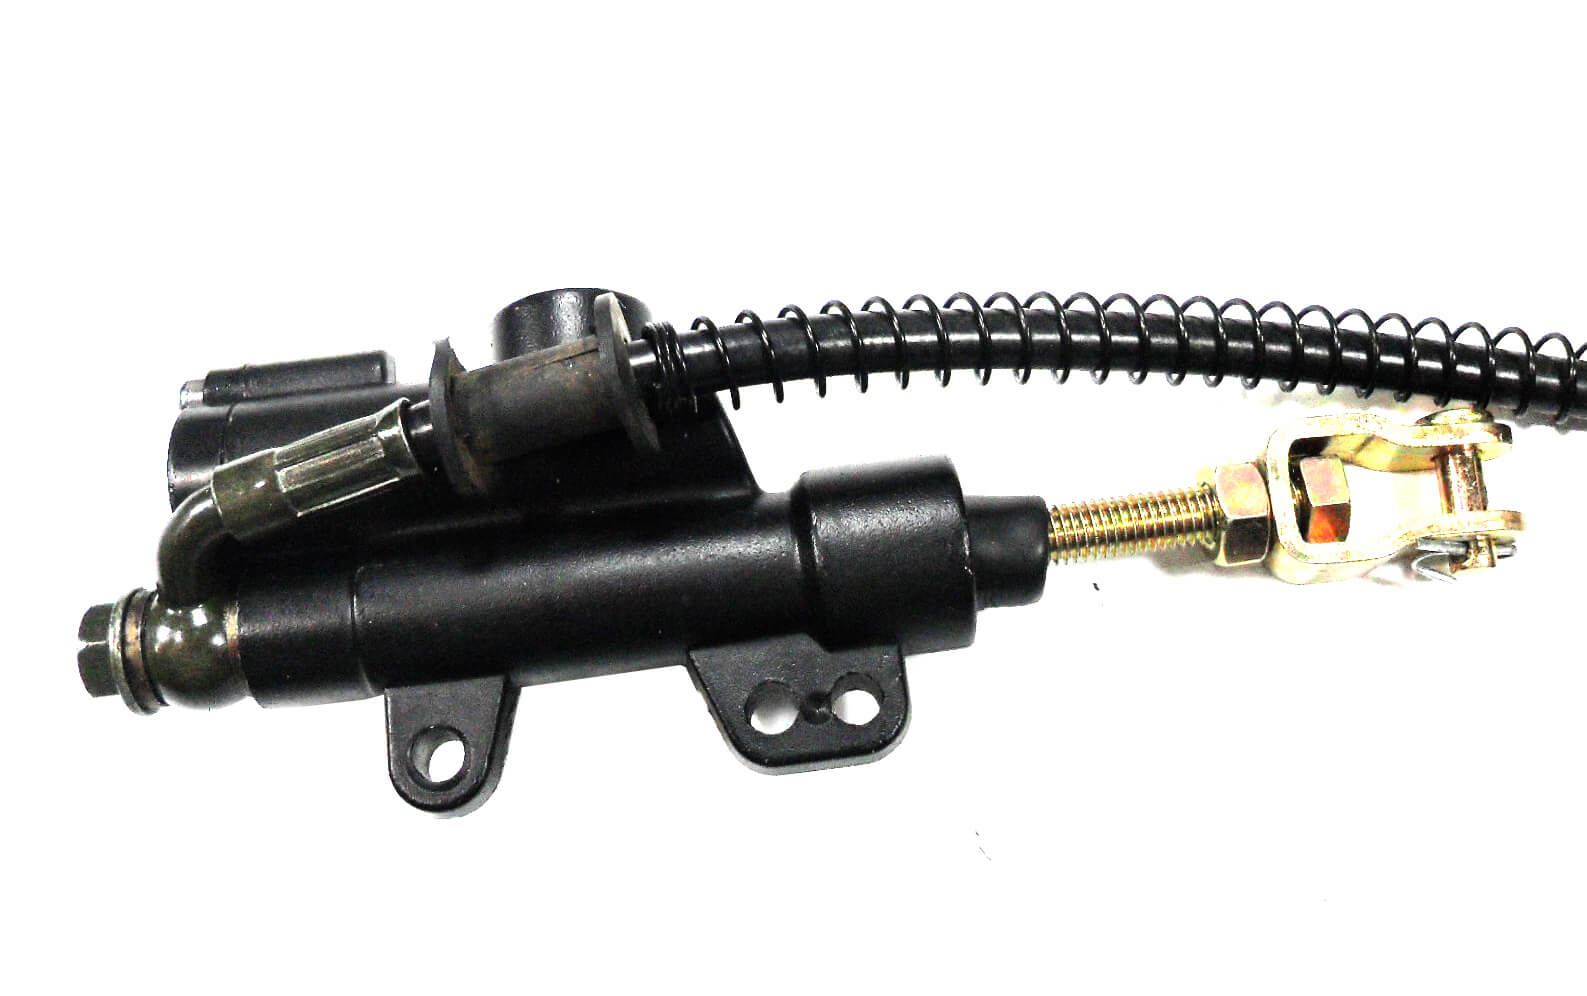 REAR FOOT BRAKE ASSEMBLY 50-125cc Mid Sized Chinese ATVs, Dirtbikes - Click Image to Close